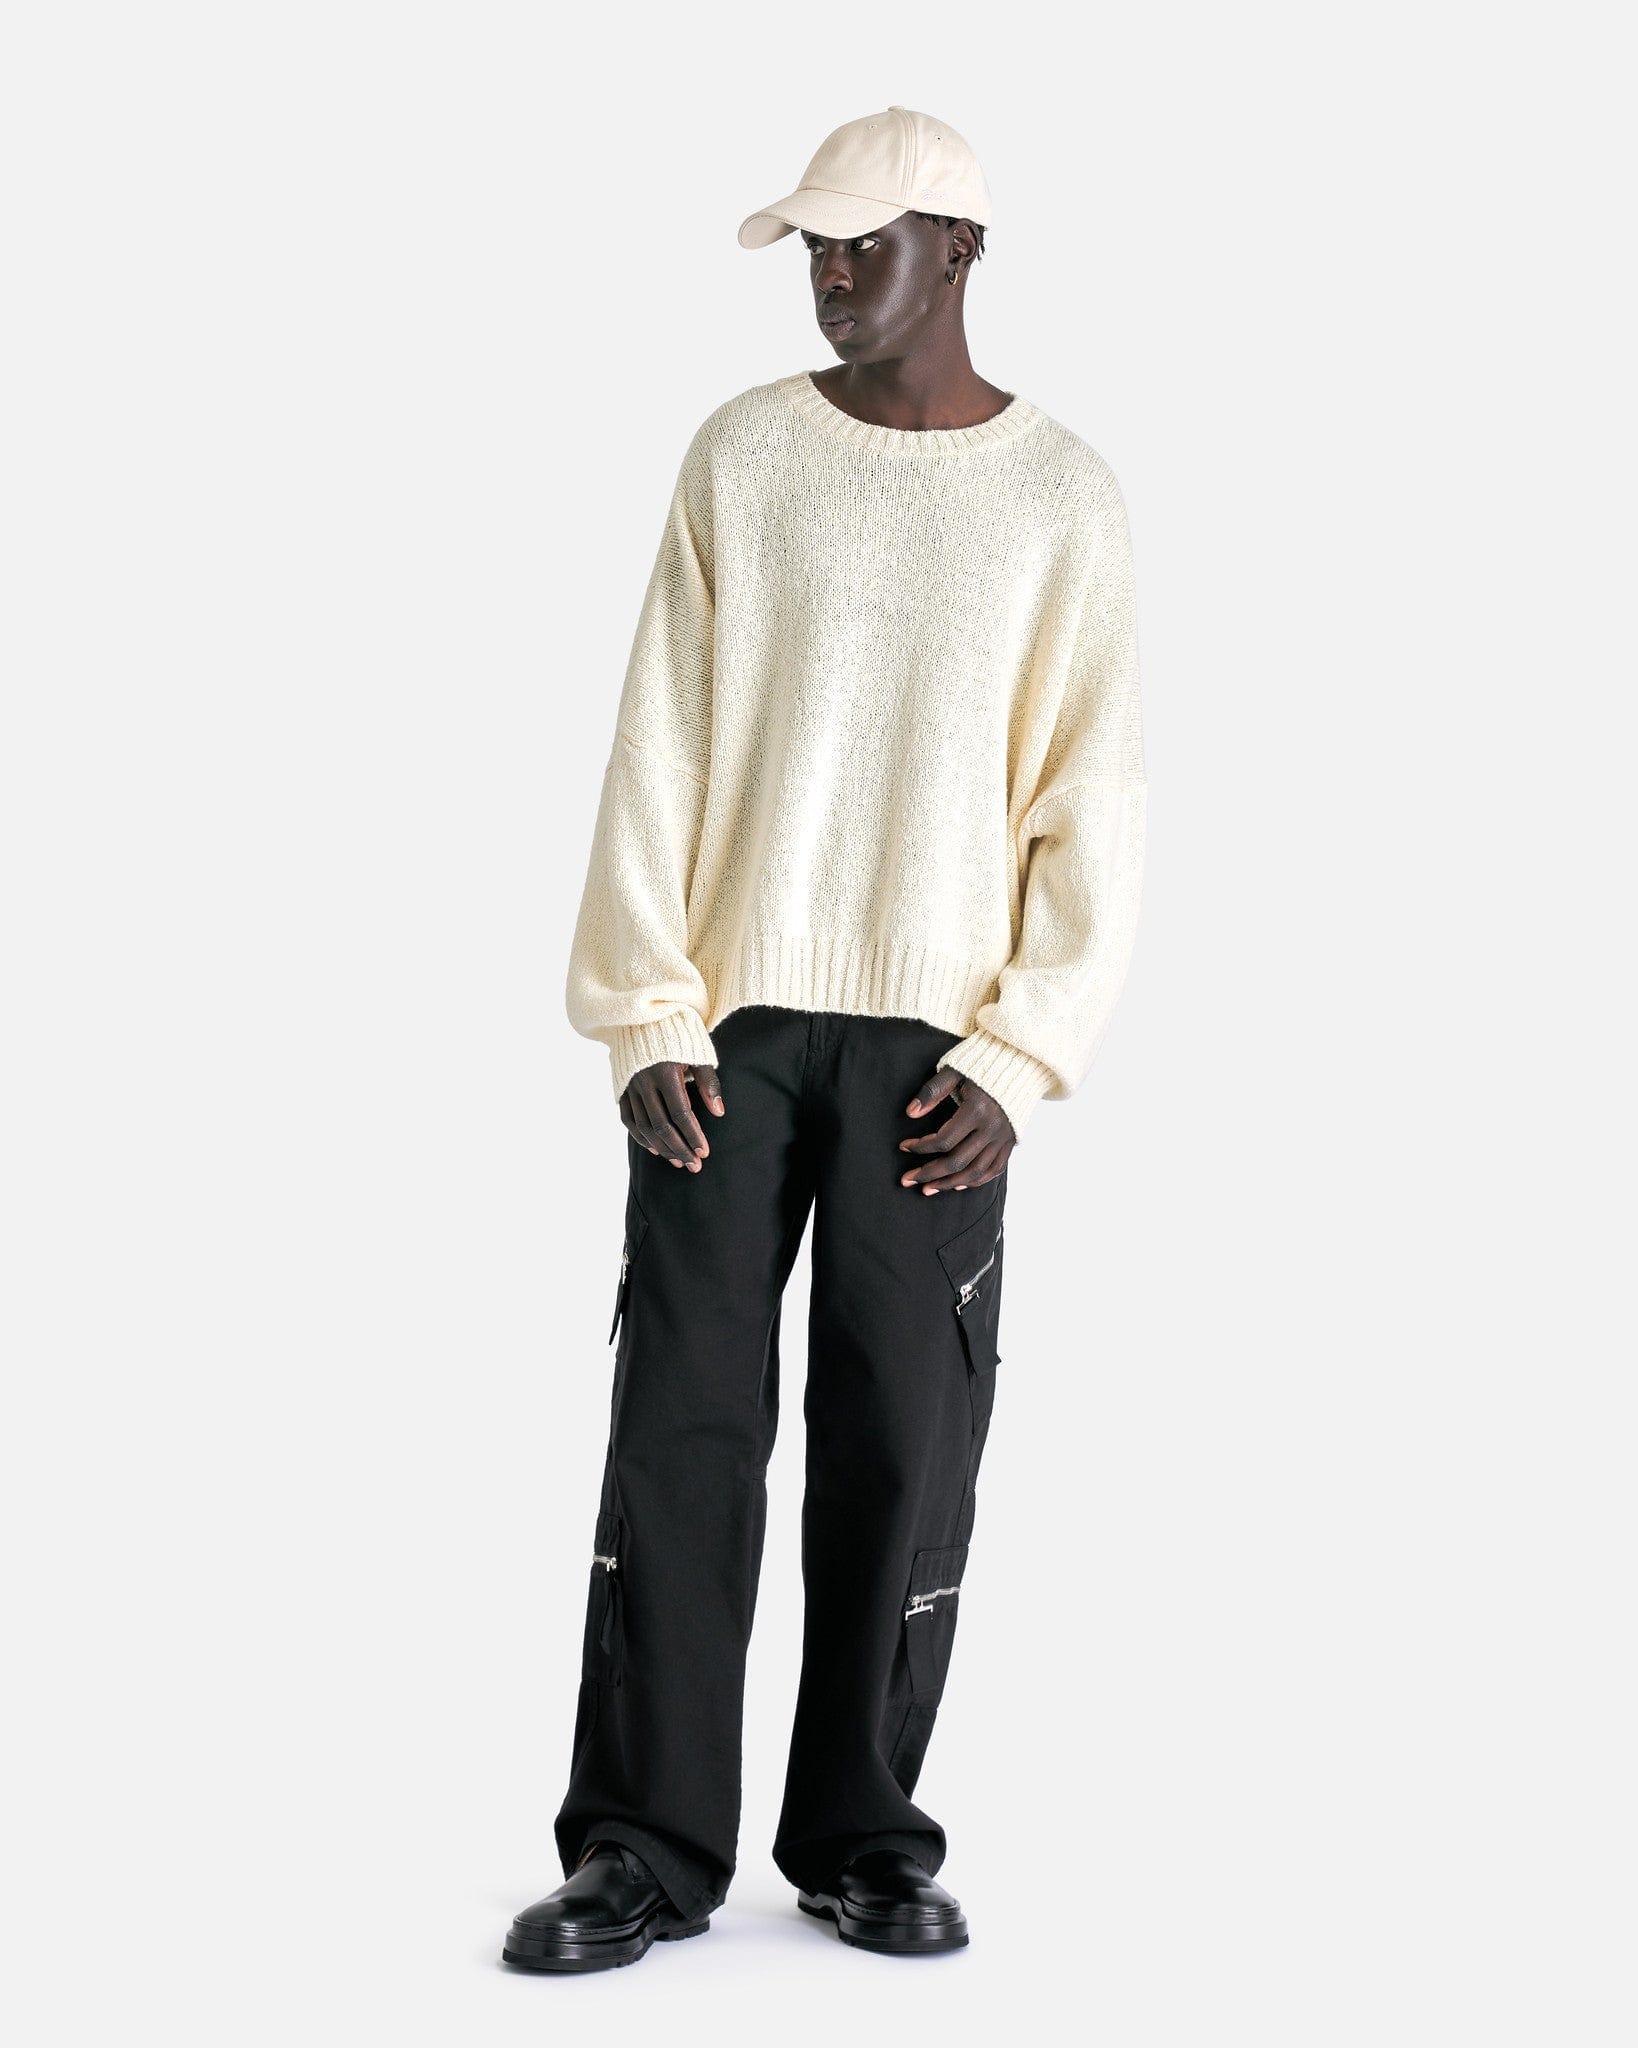 The Row Men's Sweater Grohl Top in Ivory